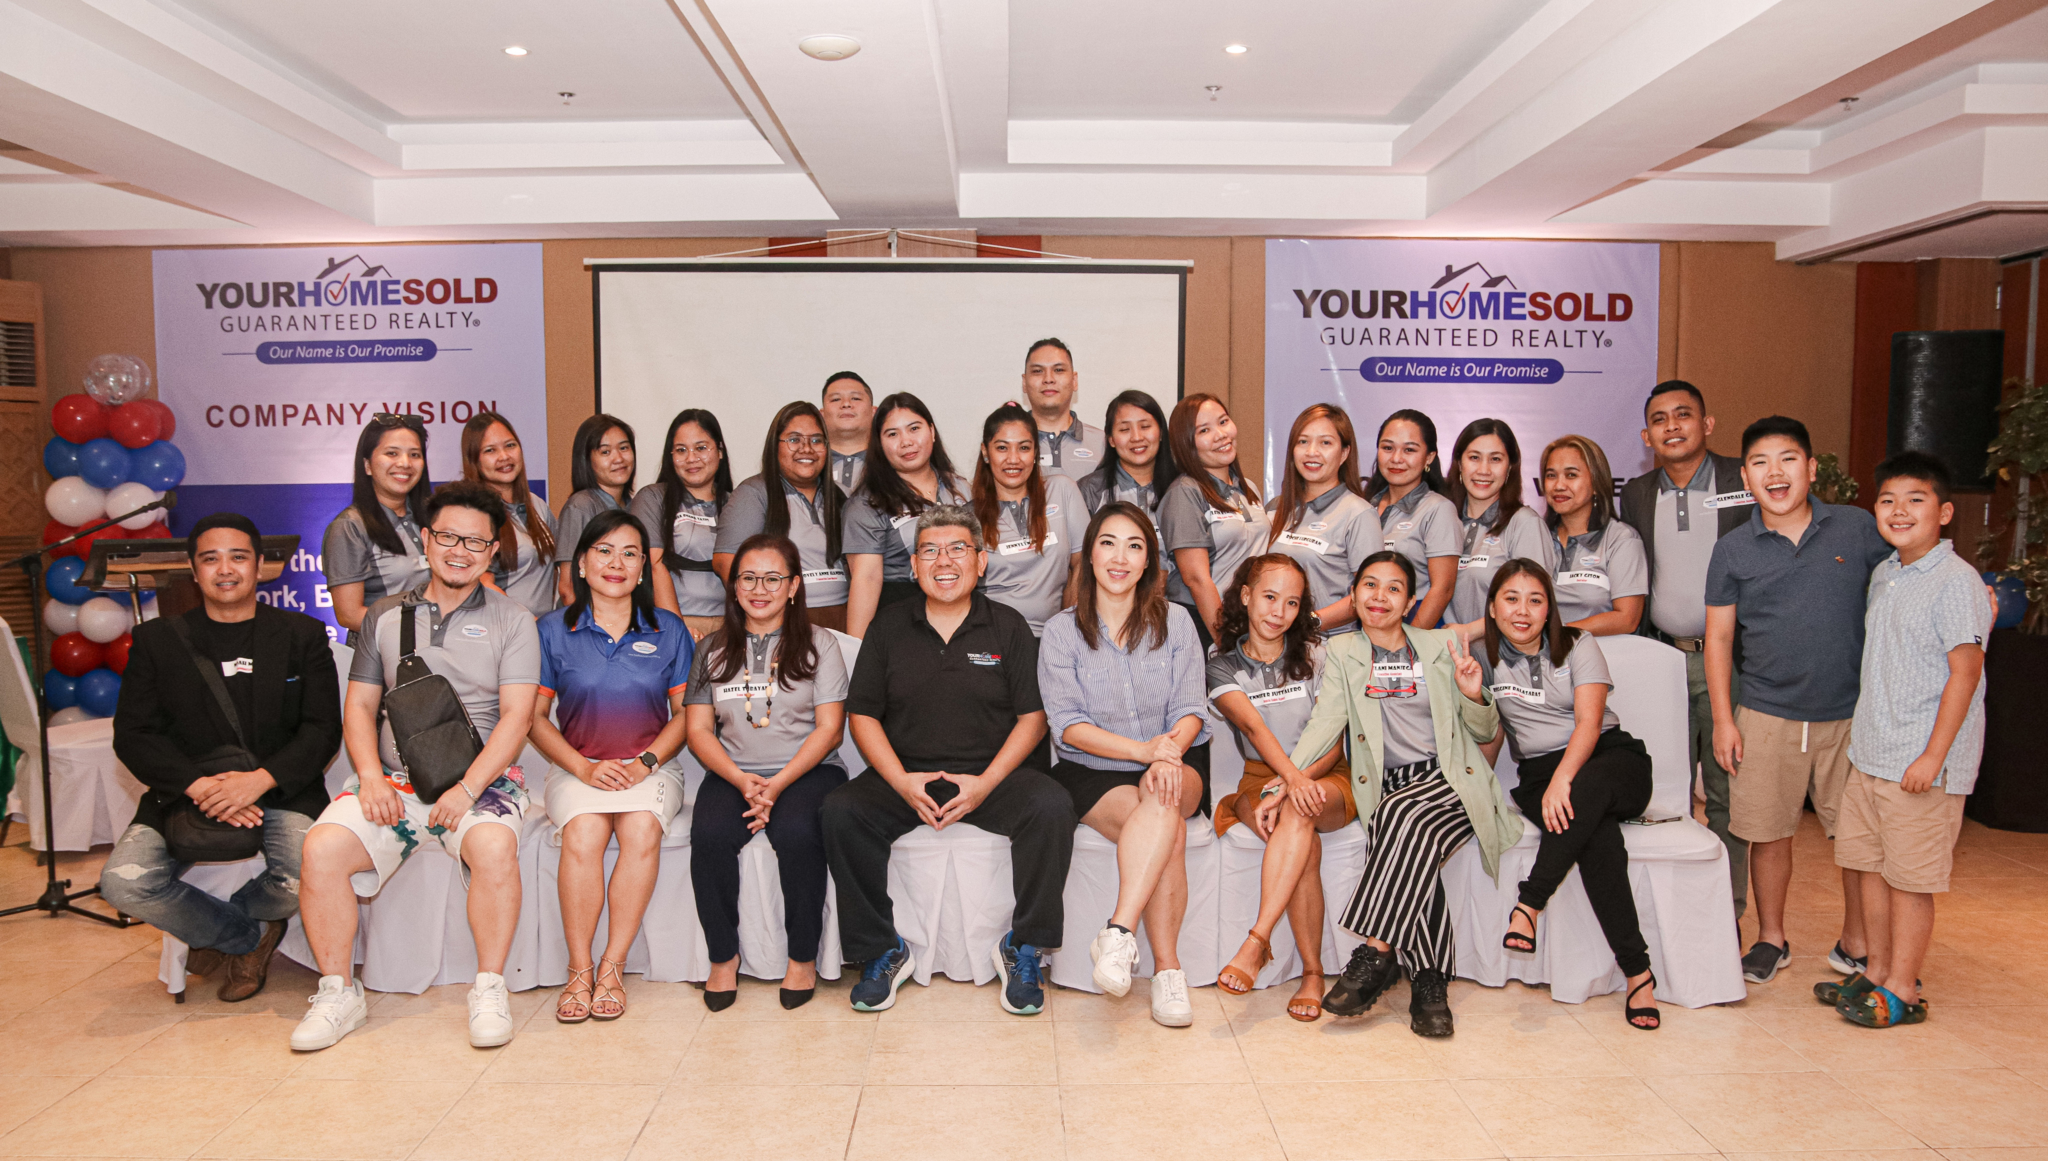 YOUR-HOME-SOLD-GUARANTEED-REALTY-held-the-2022-SYMPOSIUM-in-Boracay-Island-1-2048x1161 (1).jpg